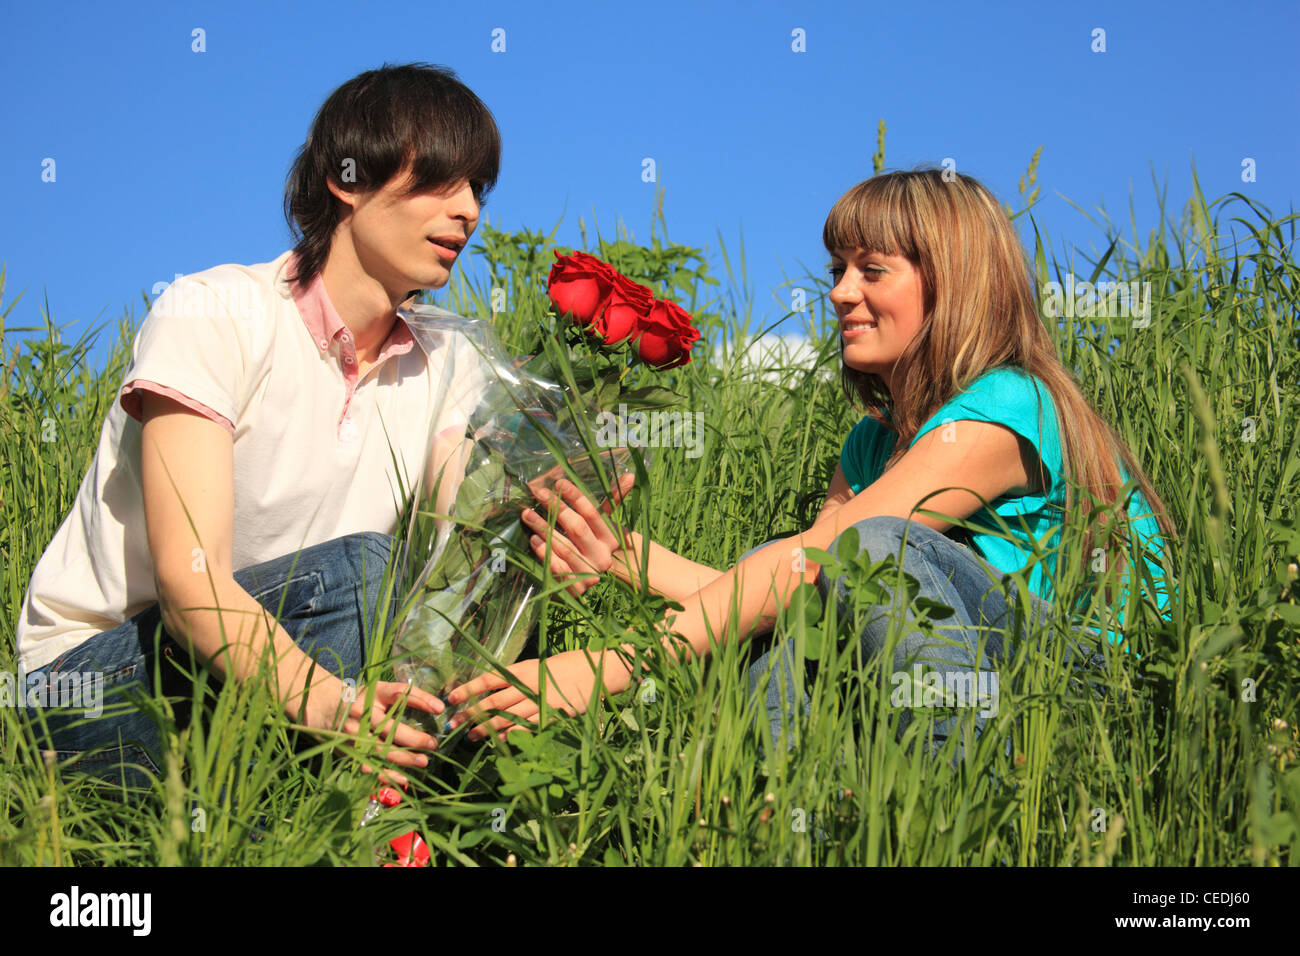 guy gives to girl bouquet of roses among grass Stock Photo